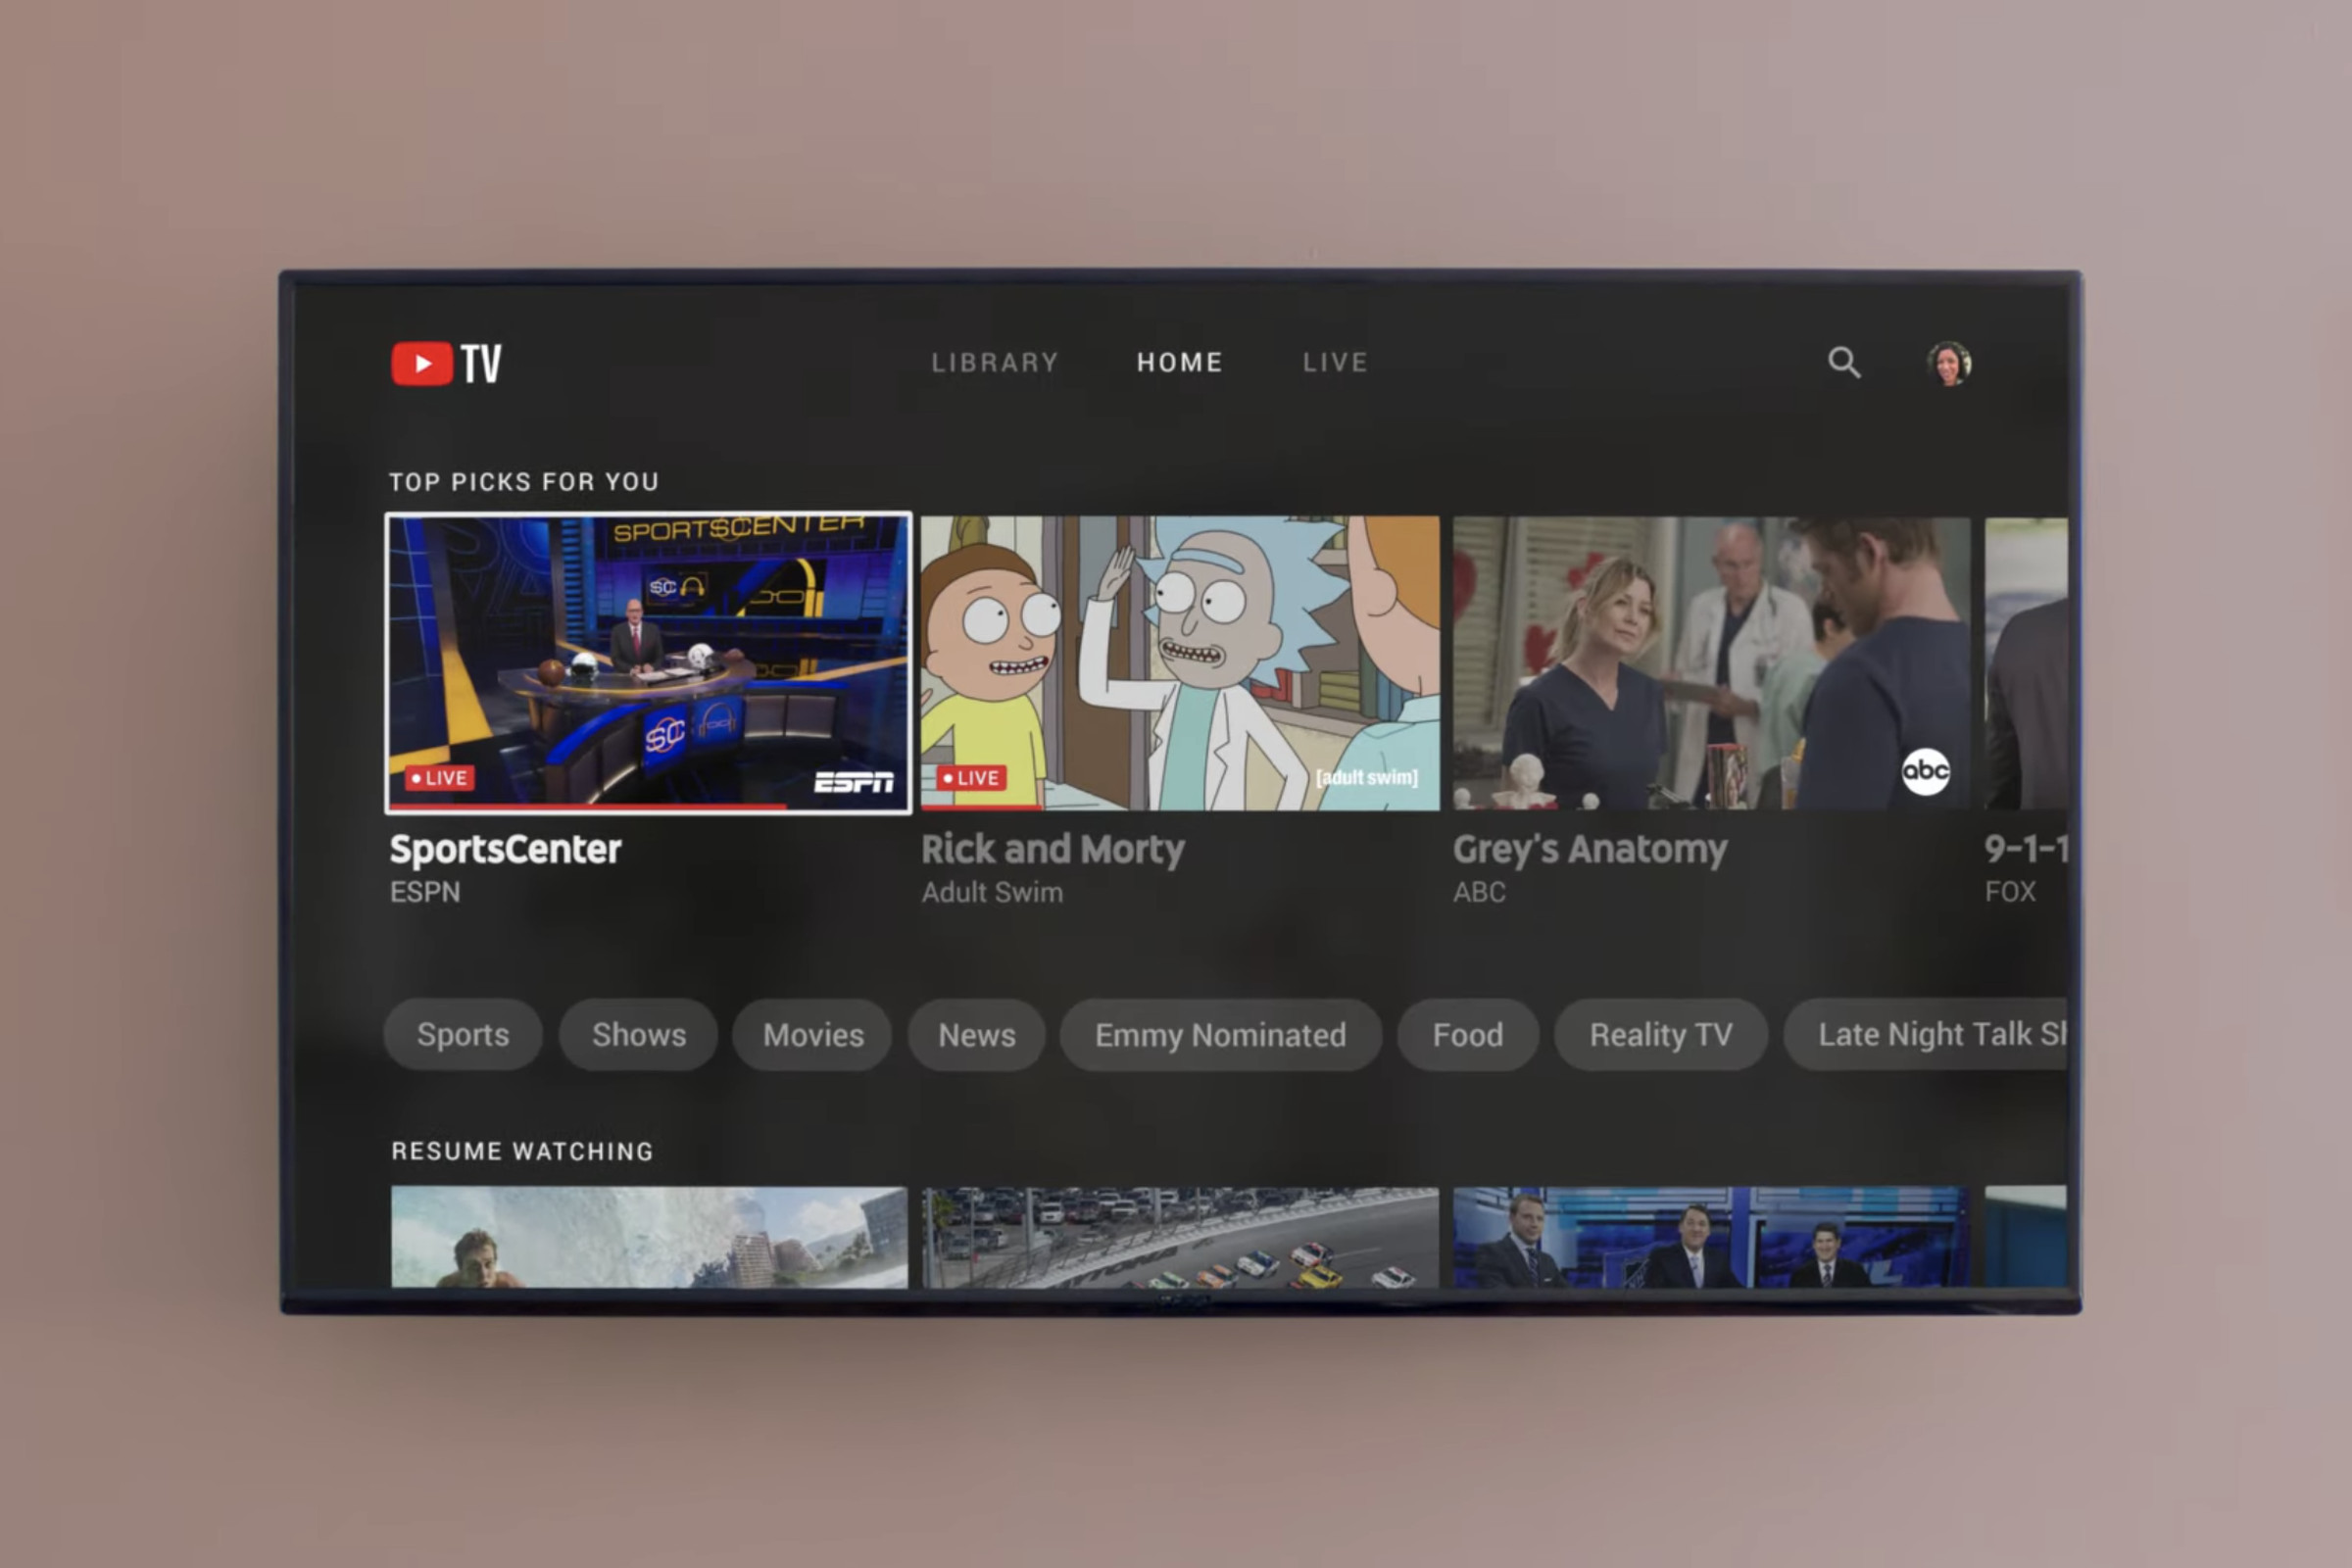 YouTube TV’s interface as of February 2021.